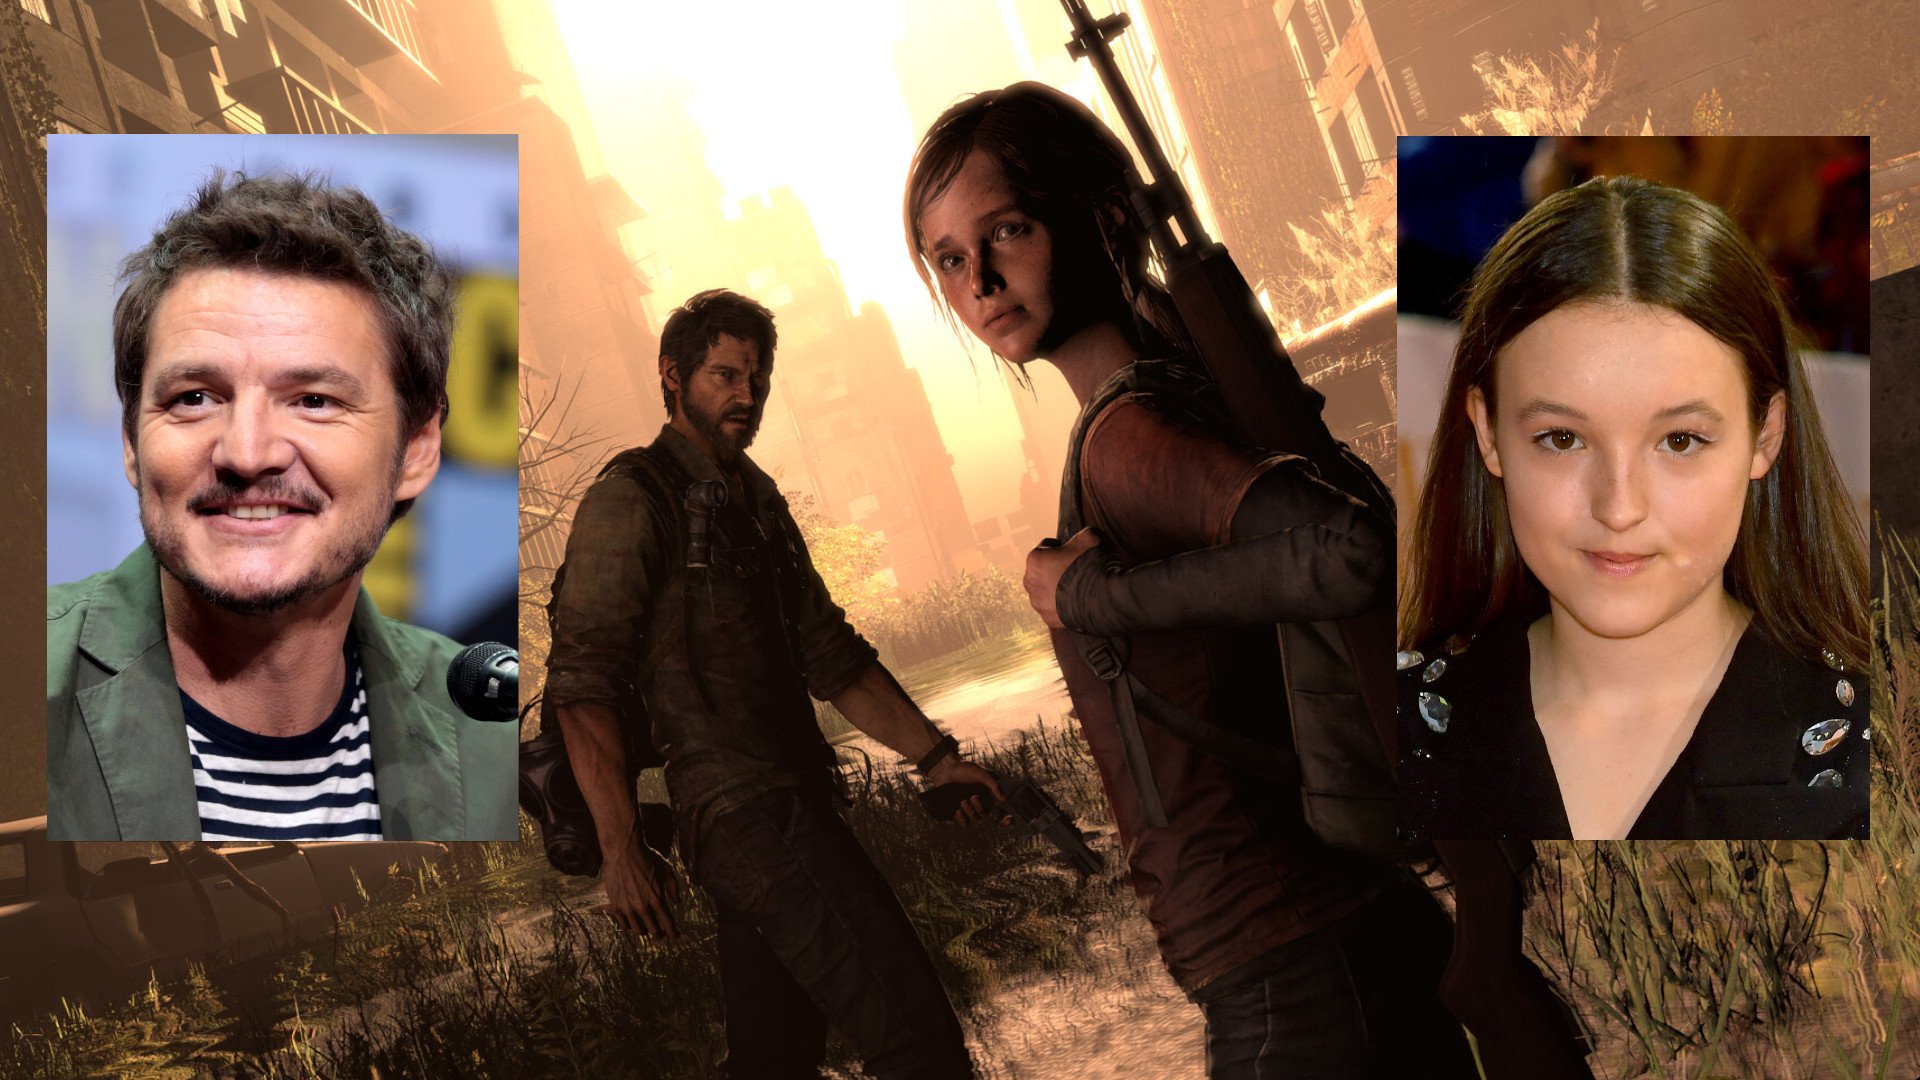 The Last of Us HBO series 'will take dialogue straight from the